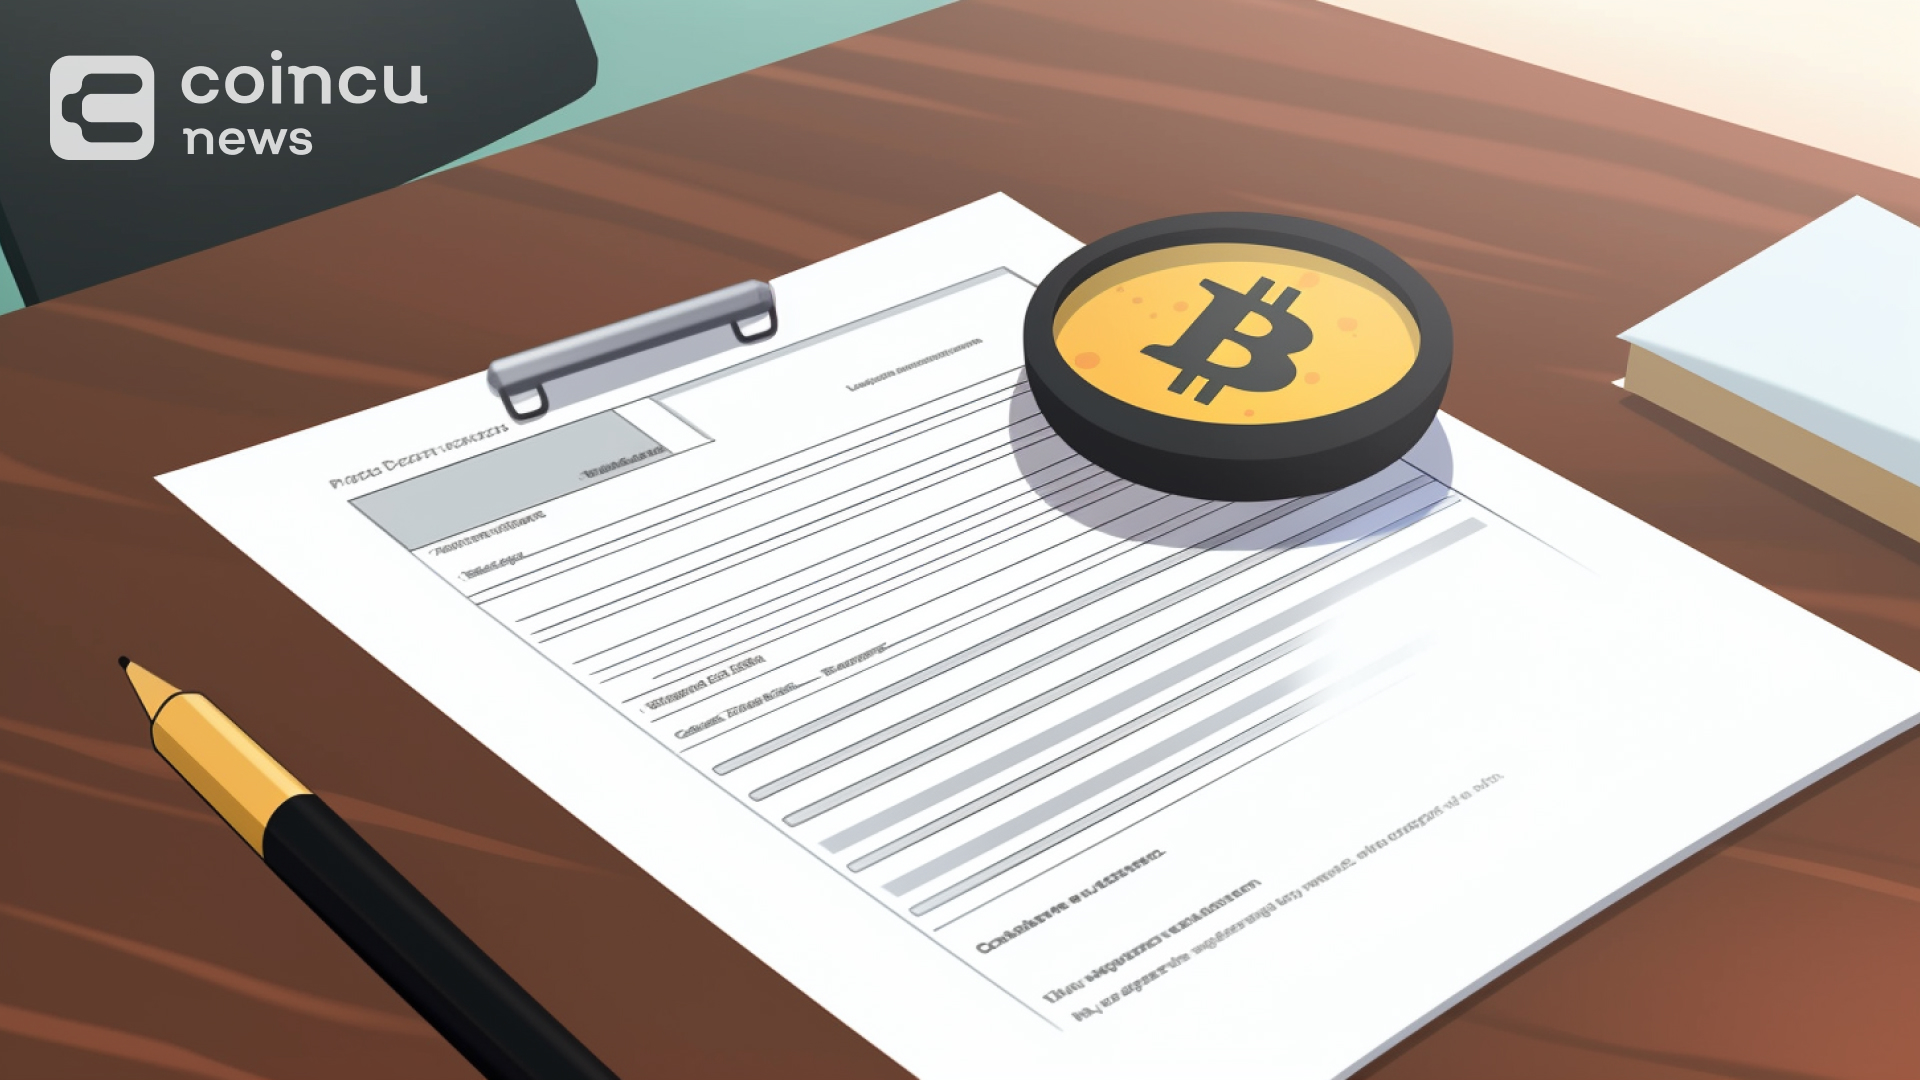 VanEck Spot Bitcoin ETF Filed New Amended Form S-1, Ticker Called "HODL"